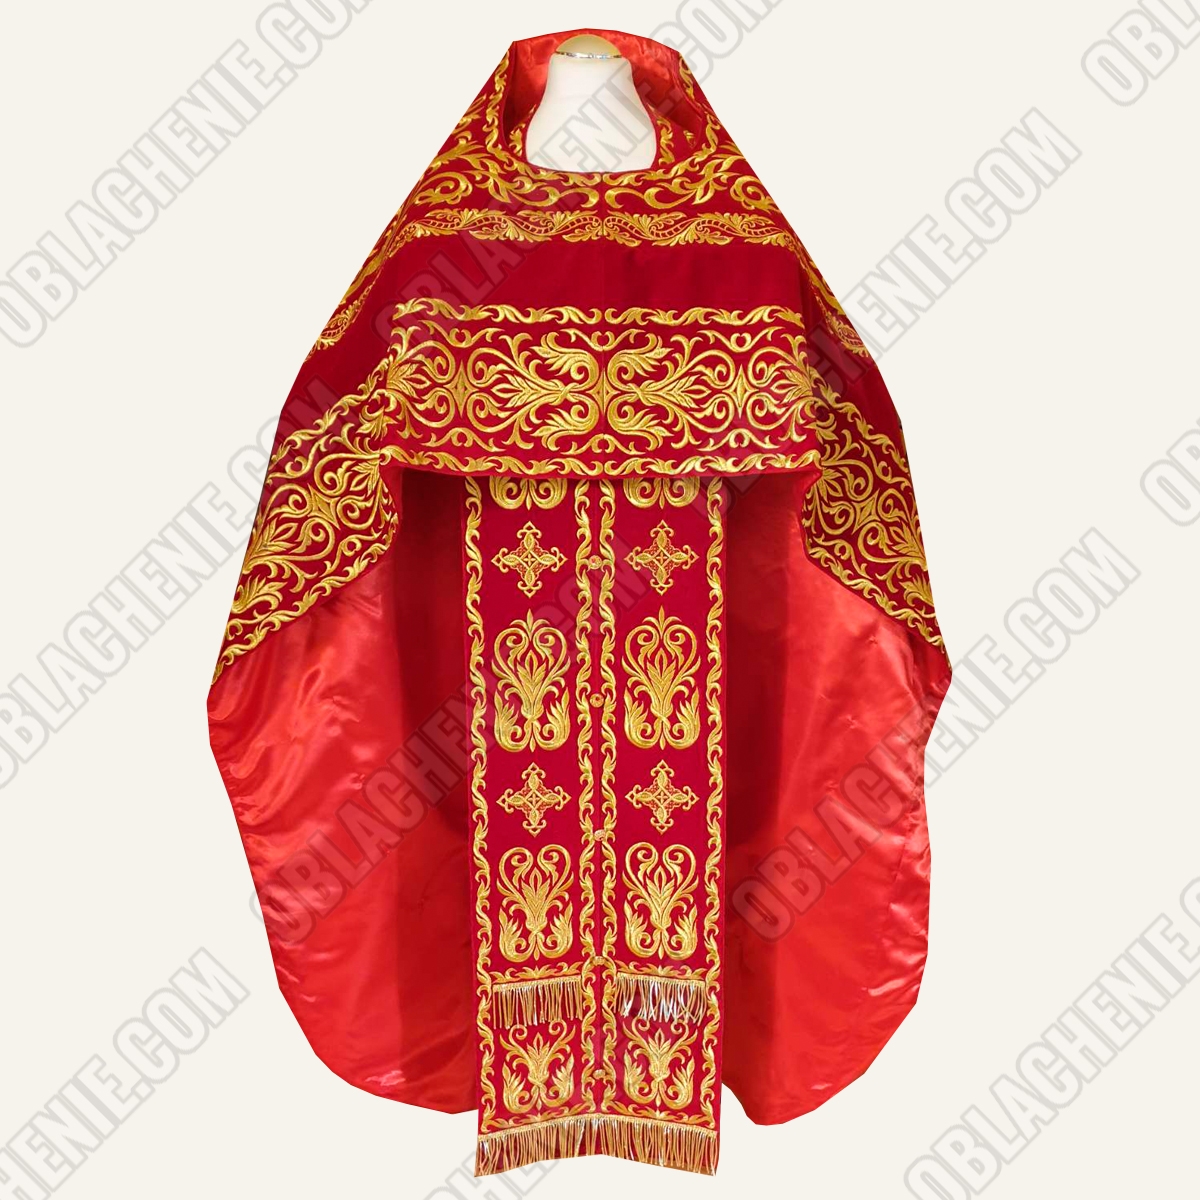 EMBROIDERED PRIEST'S VESTMENTS 11081